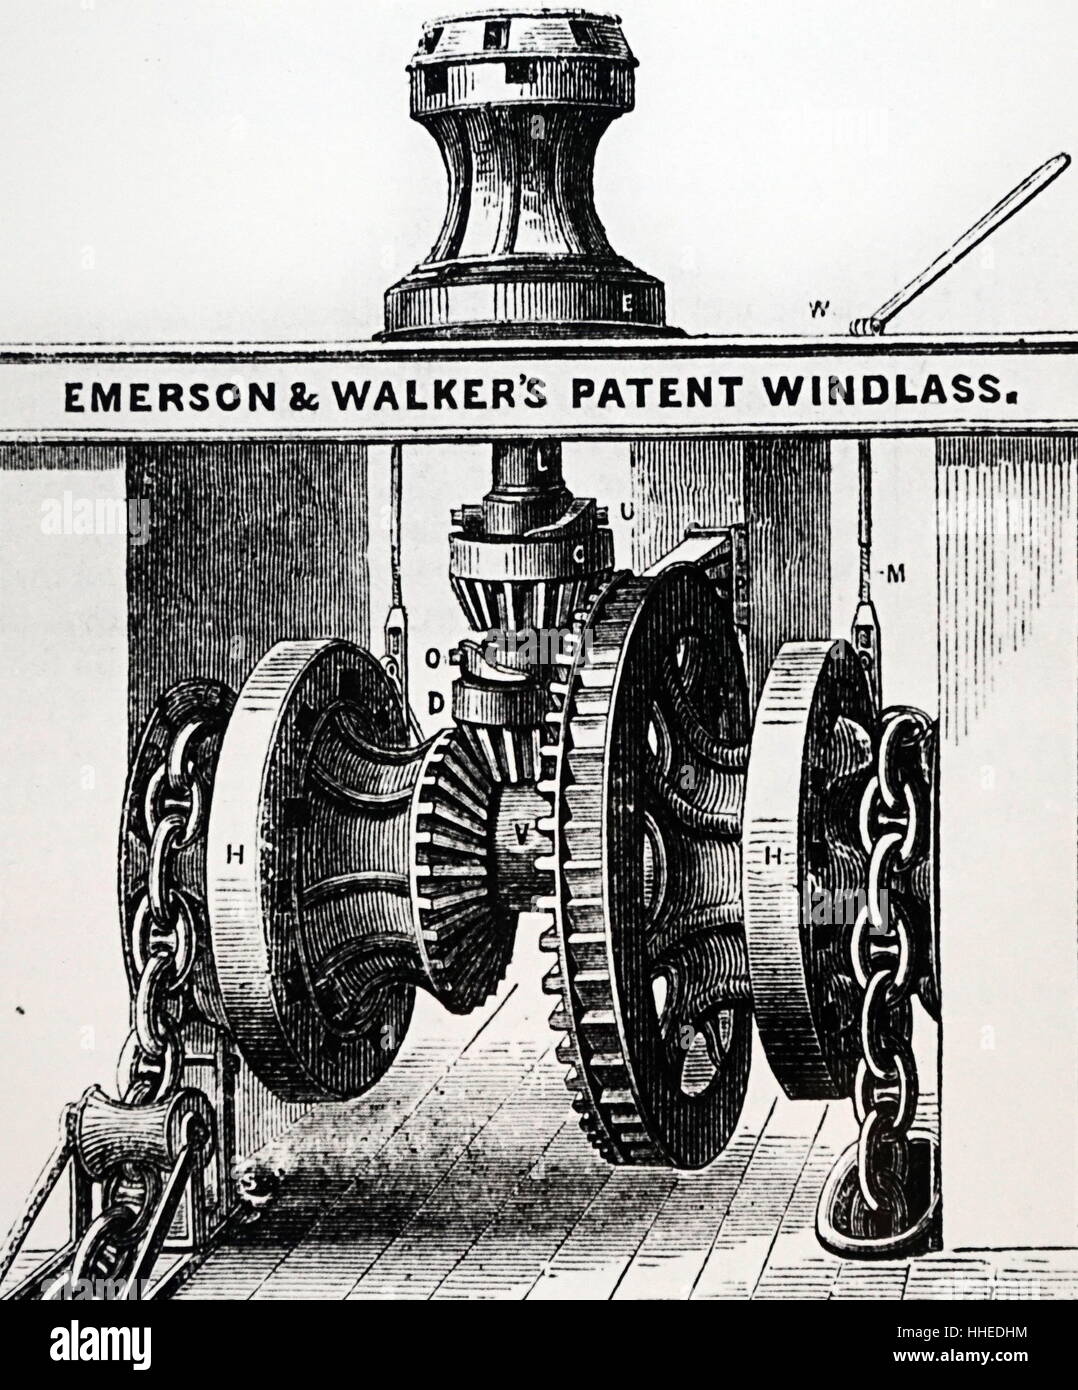 Illustration of a Windlass patented by Emerson & Walker. Dated 19th Century Stock Photo